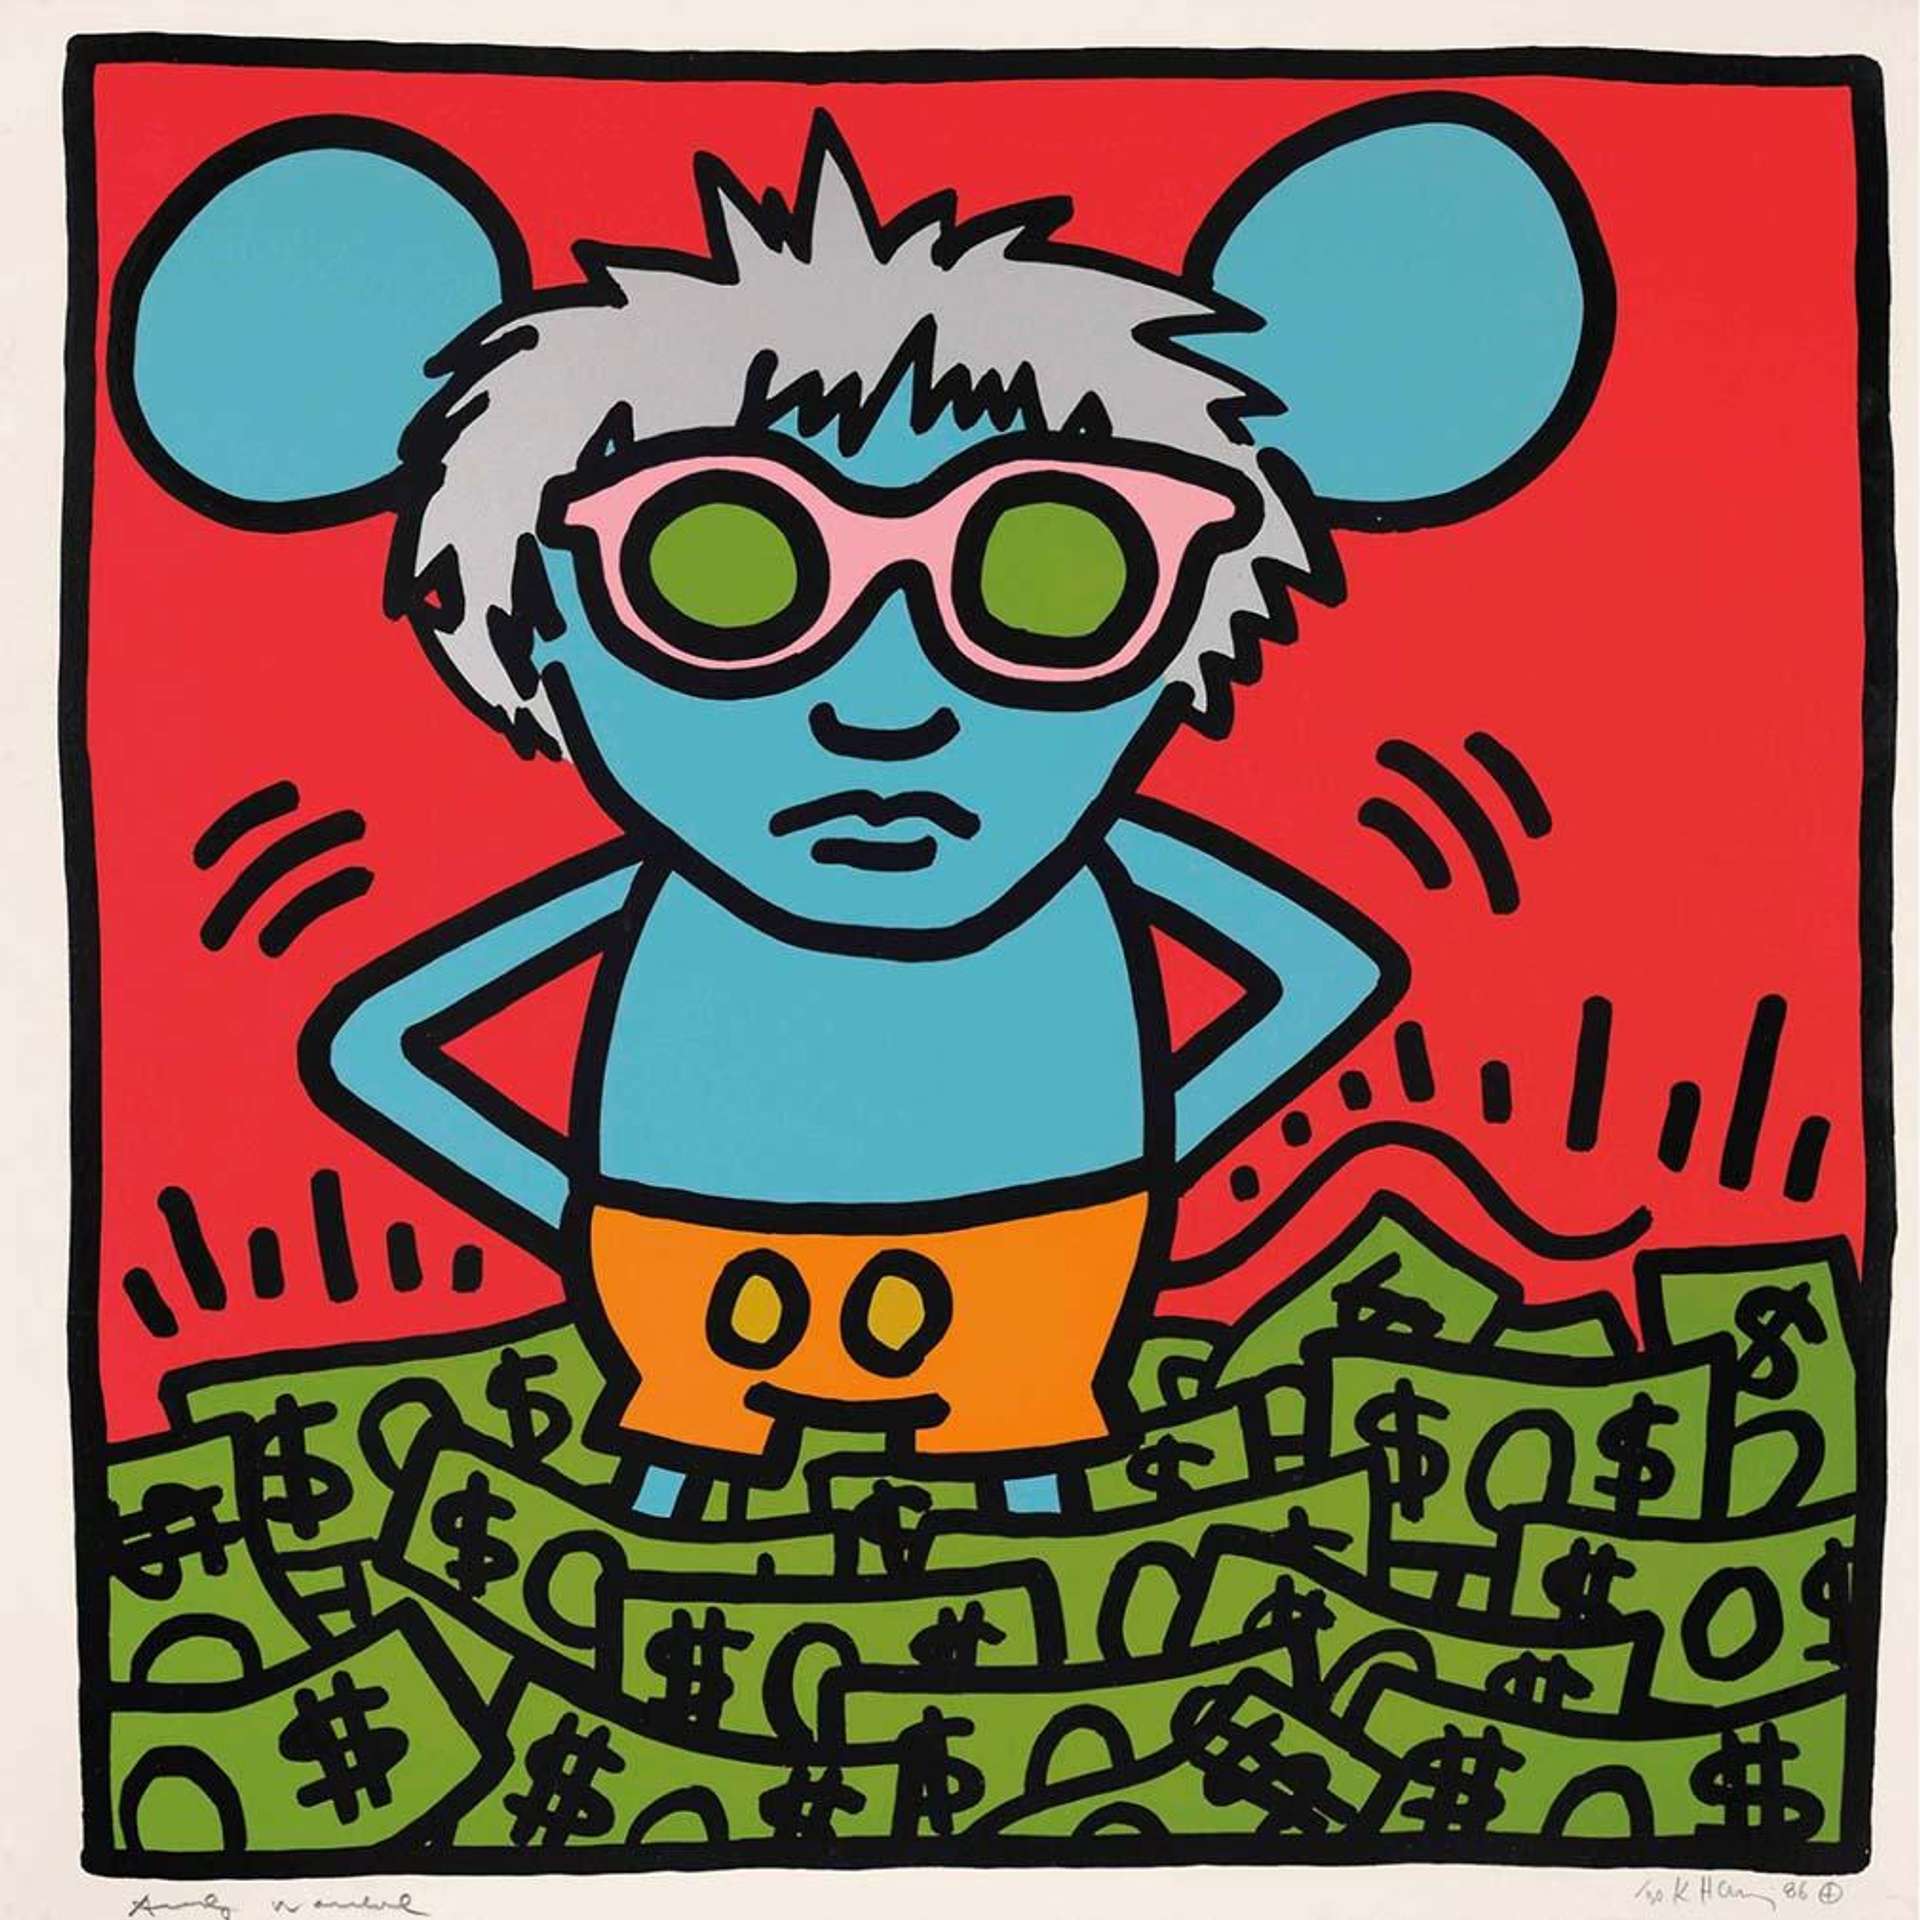 Keith Haring’s Andy Mouse 1. A Pop Art screenprint of Disney’s Mickey Mouse in the likeness of Andy Warhol standing in a sea of money against a red background. 